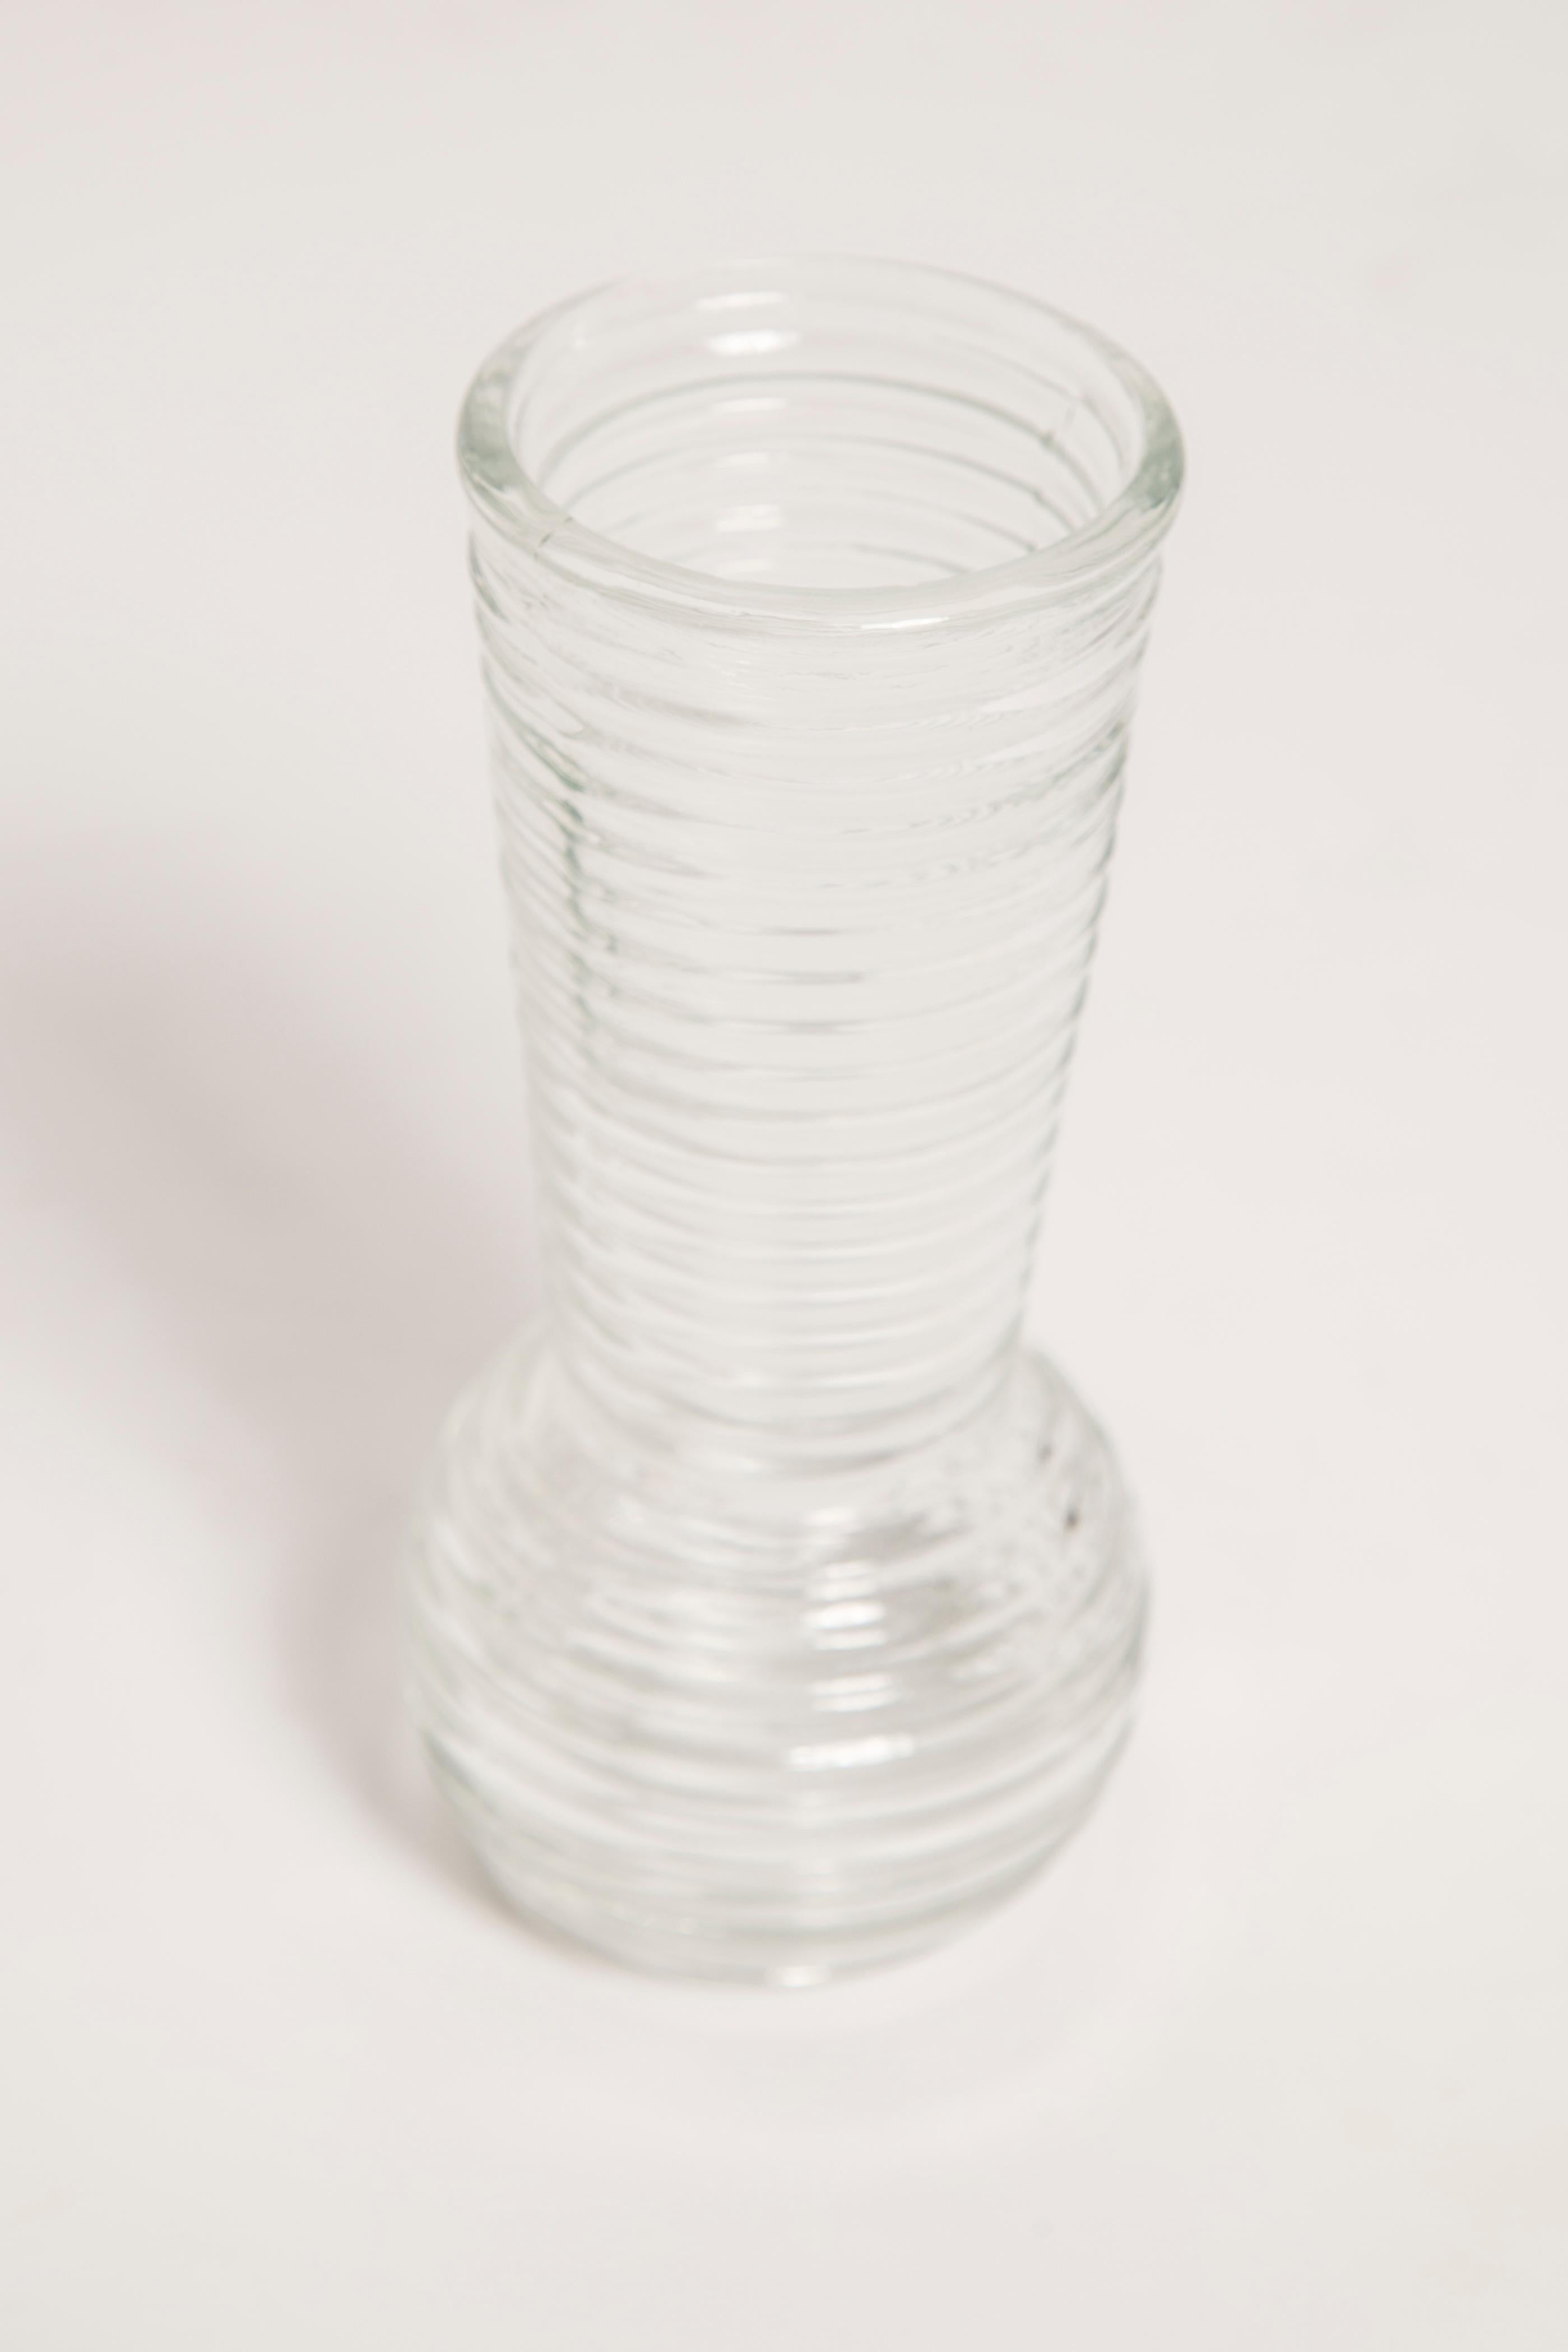 Glass Midcentury Vintage Transparent Small Vase, Europe, 1960s For Sale